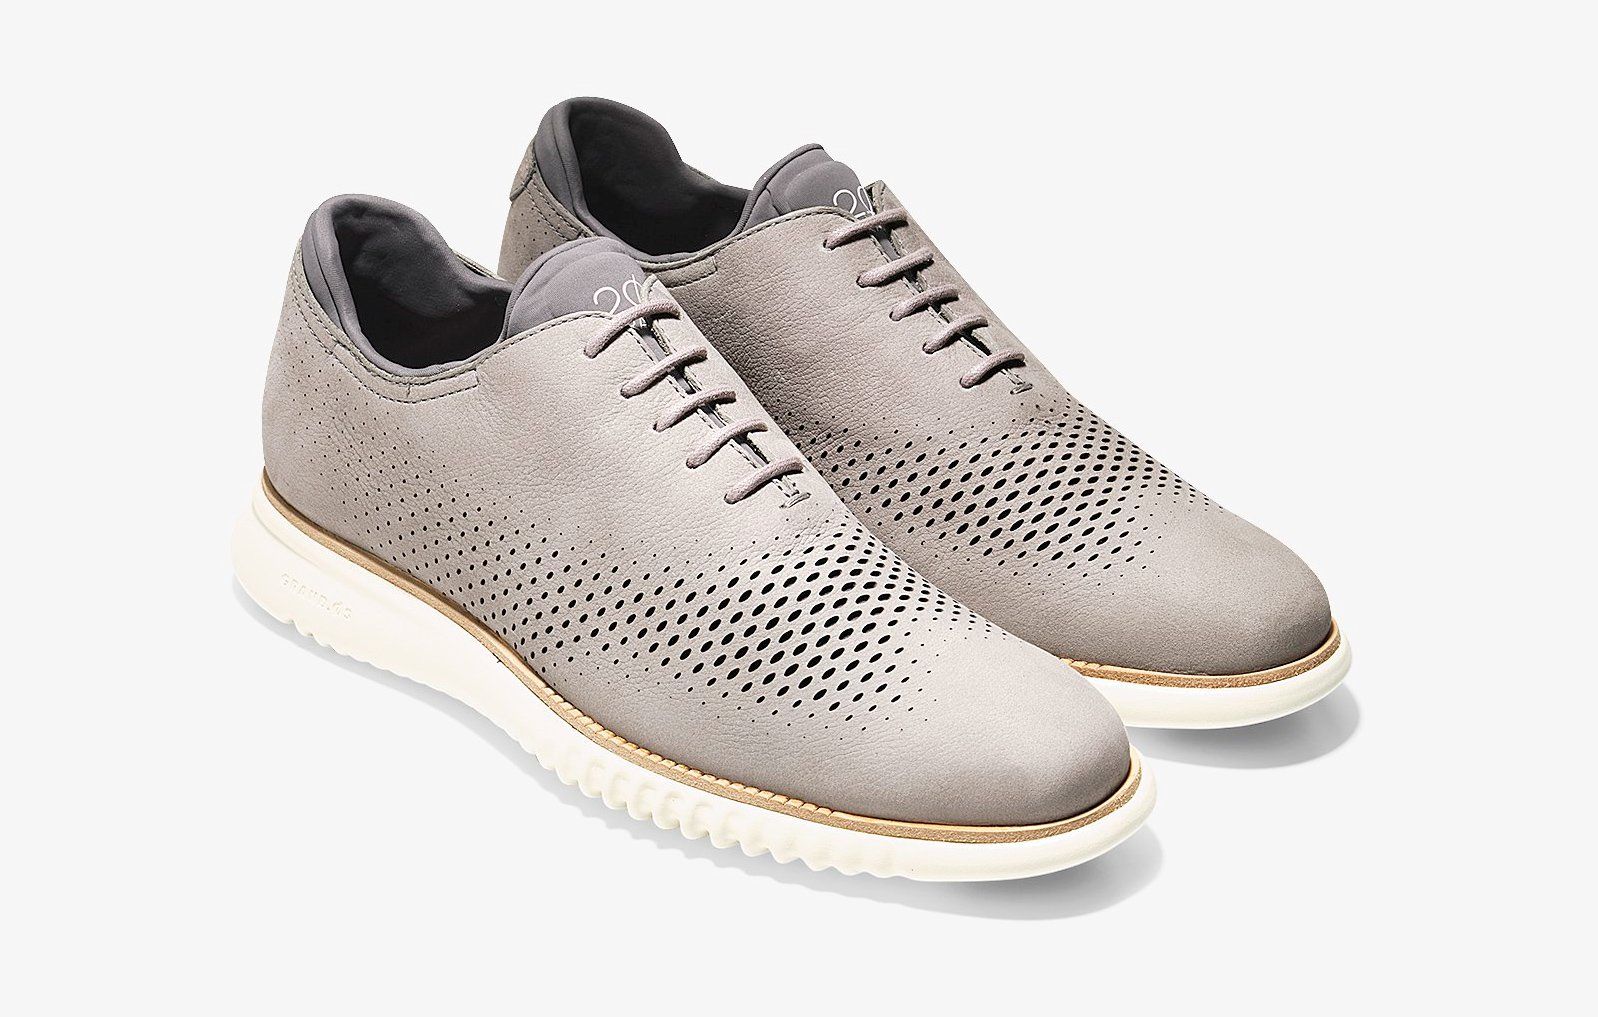  Cole Haan Dress Shoes: Yes, You 